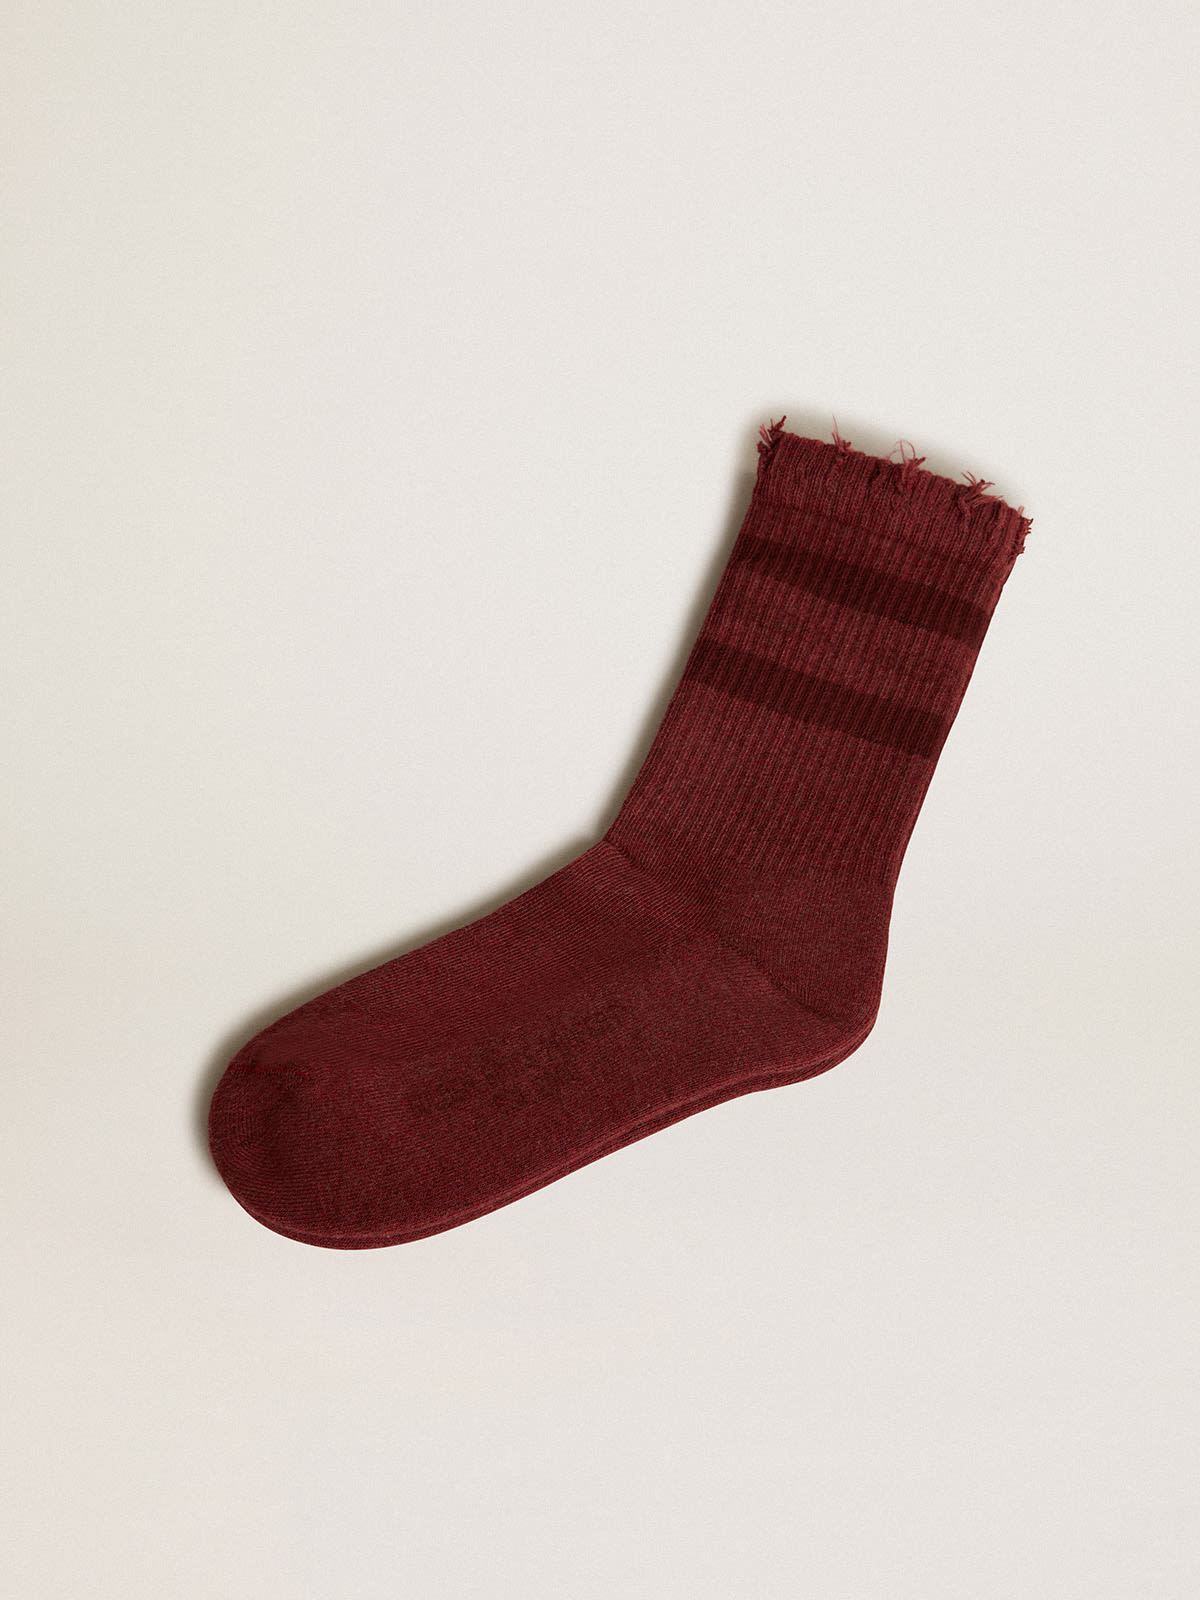 Golden Goose - Burgundy socks with distressed details and tone-on-tone stripes in 